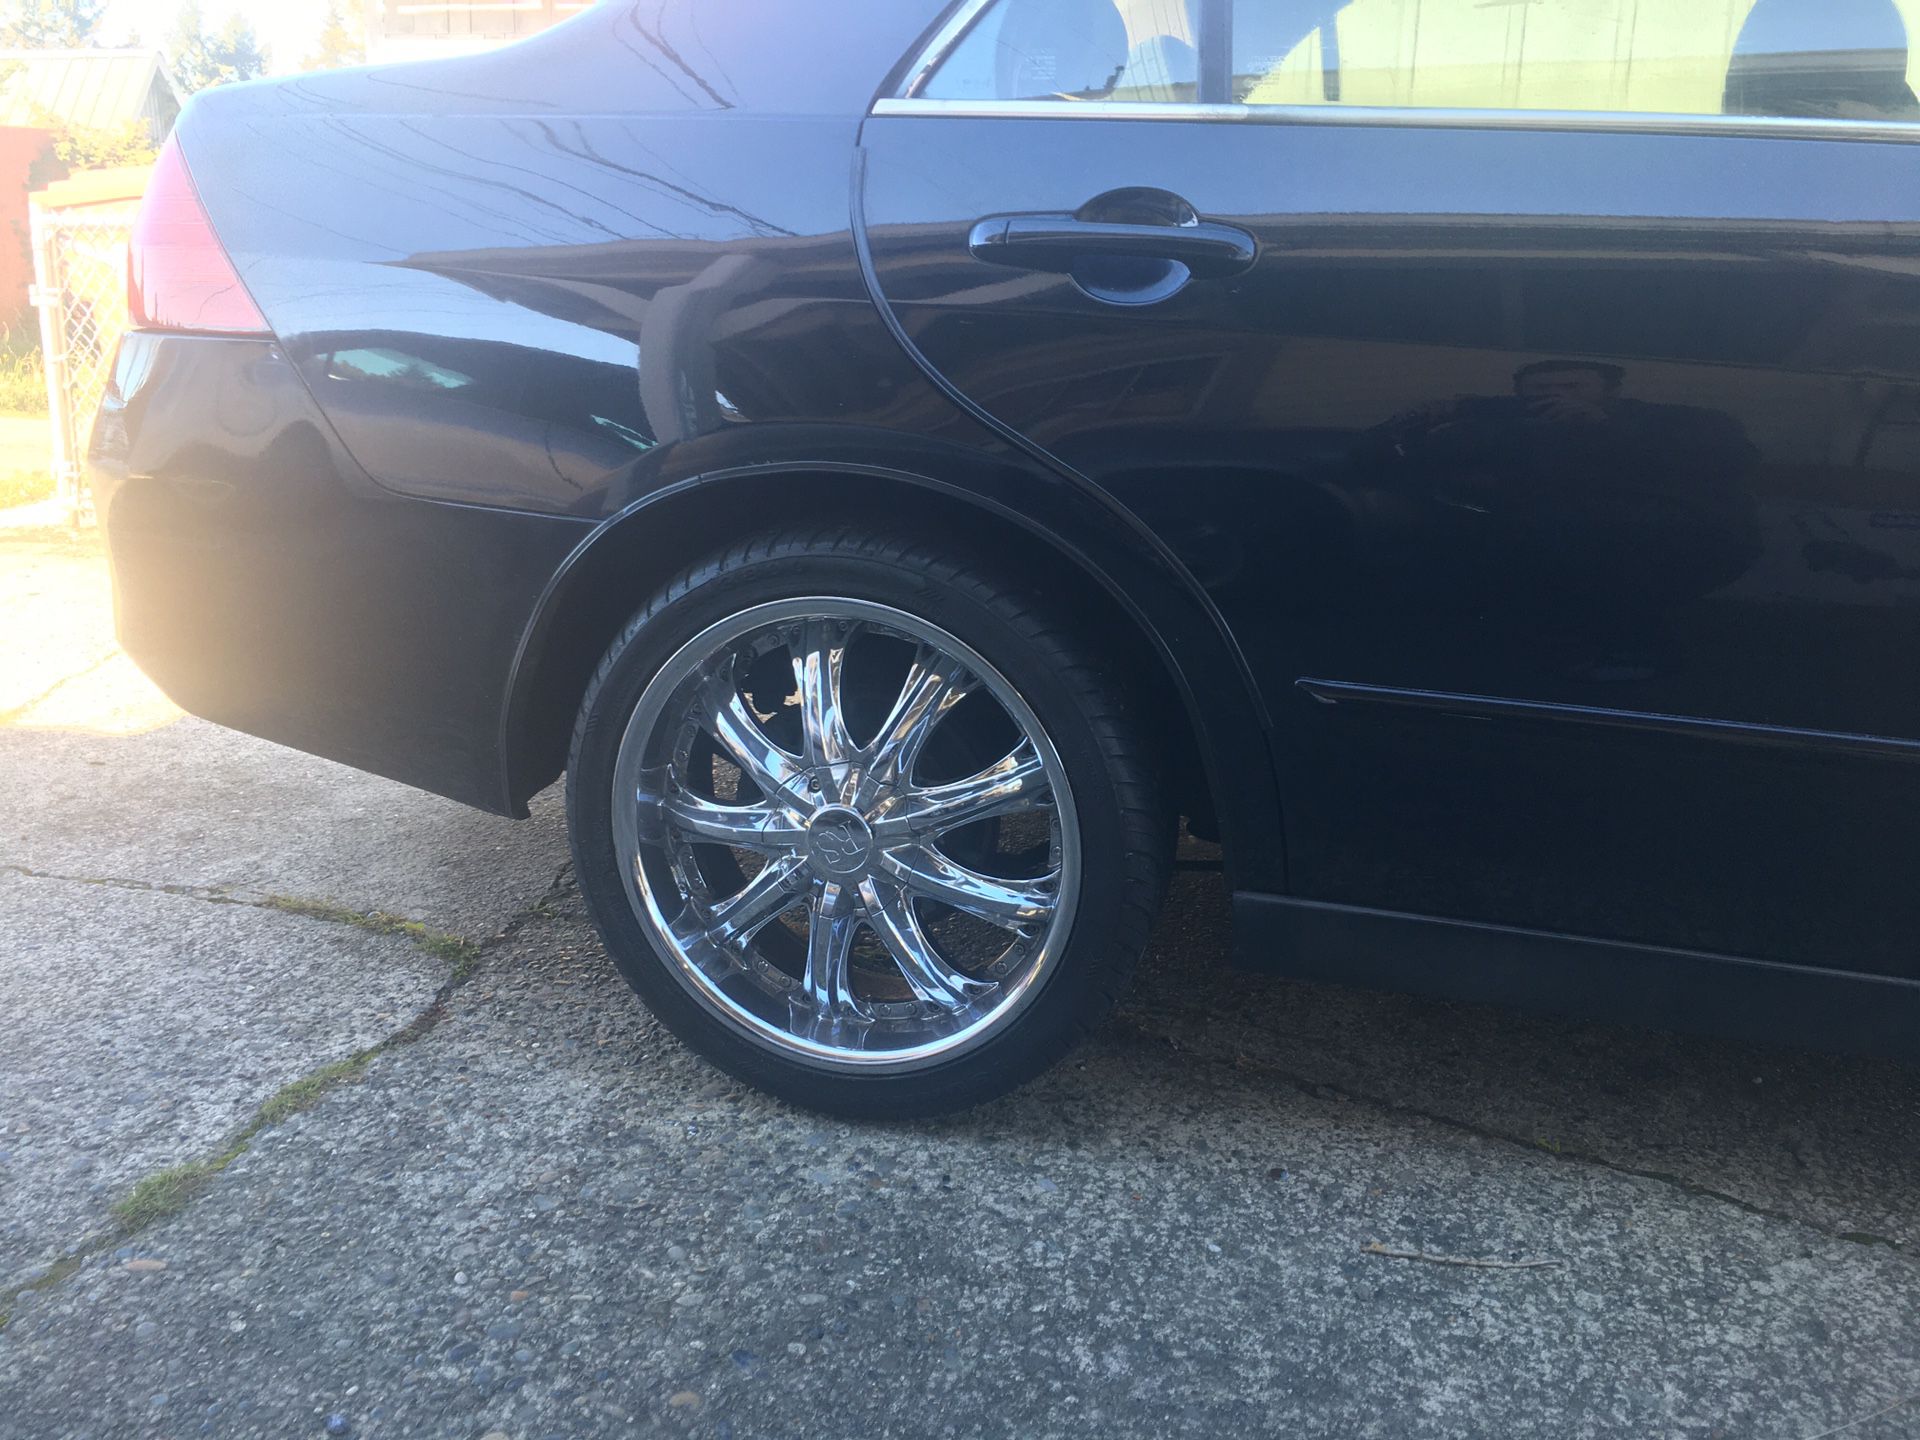 18 in chrome rims and nice 225/40 zr 18 tires 5x114.3. Universal fit Honda accord